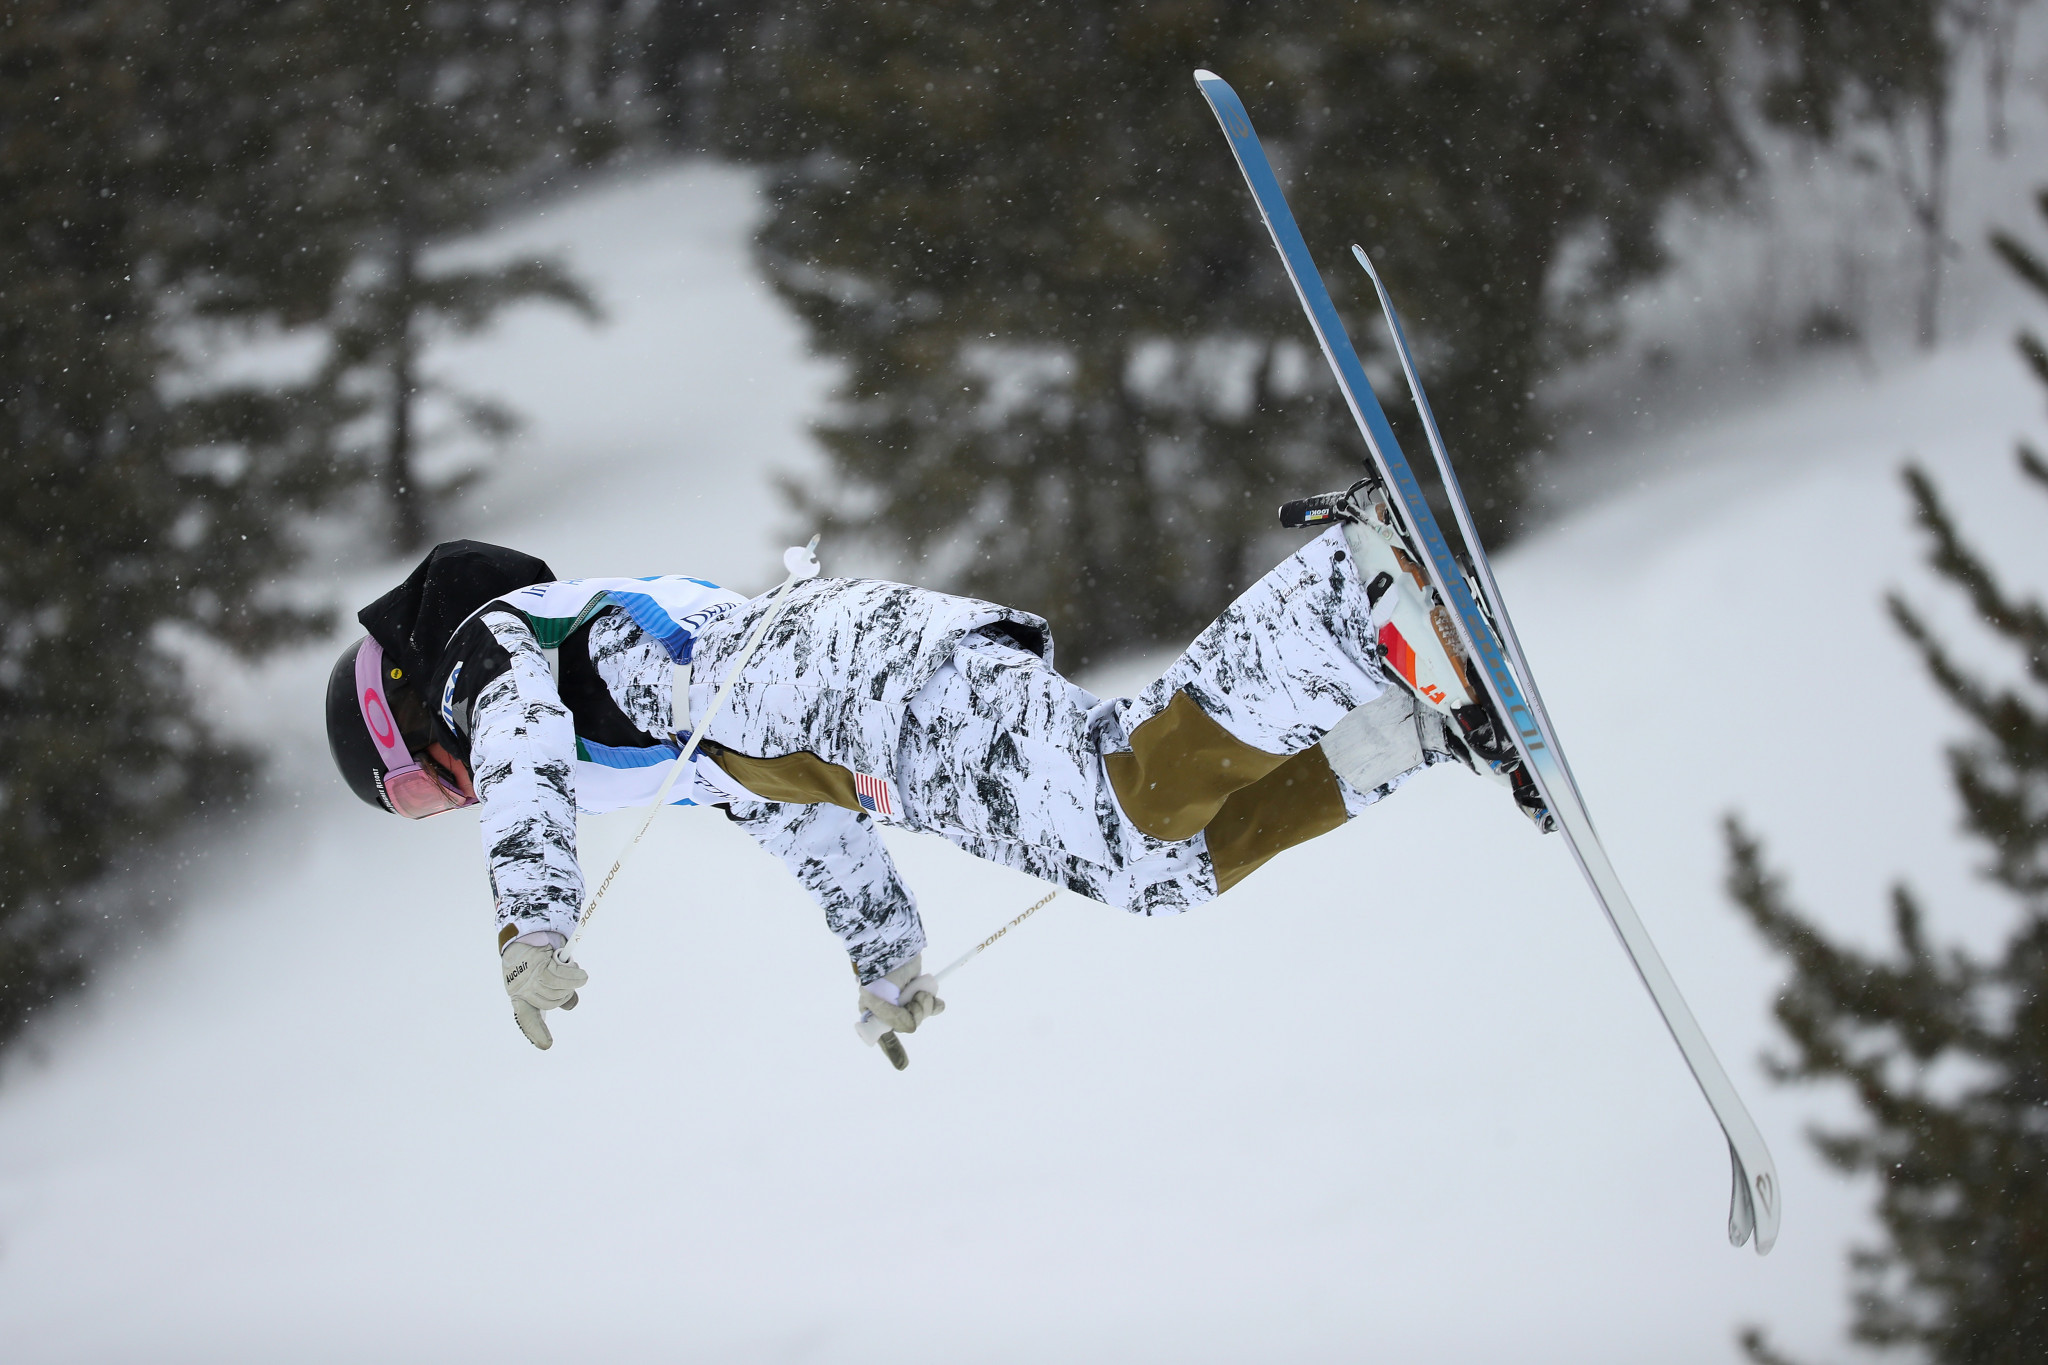 Jaelin Kauf spearheads the moguls team for the upcoming season ©Getty Images